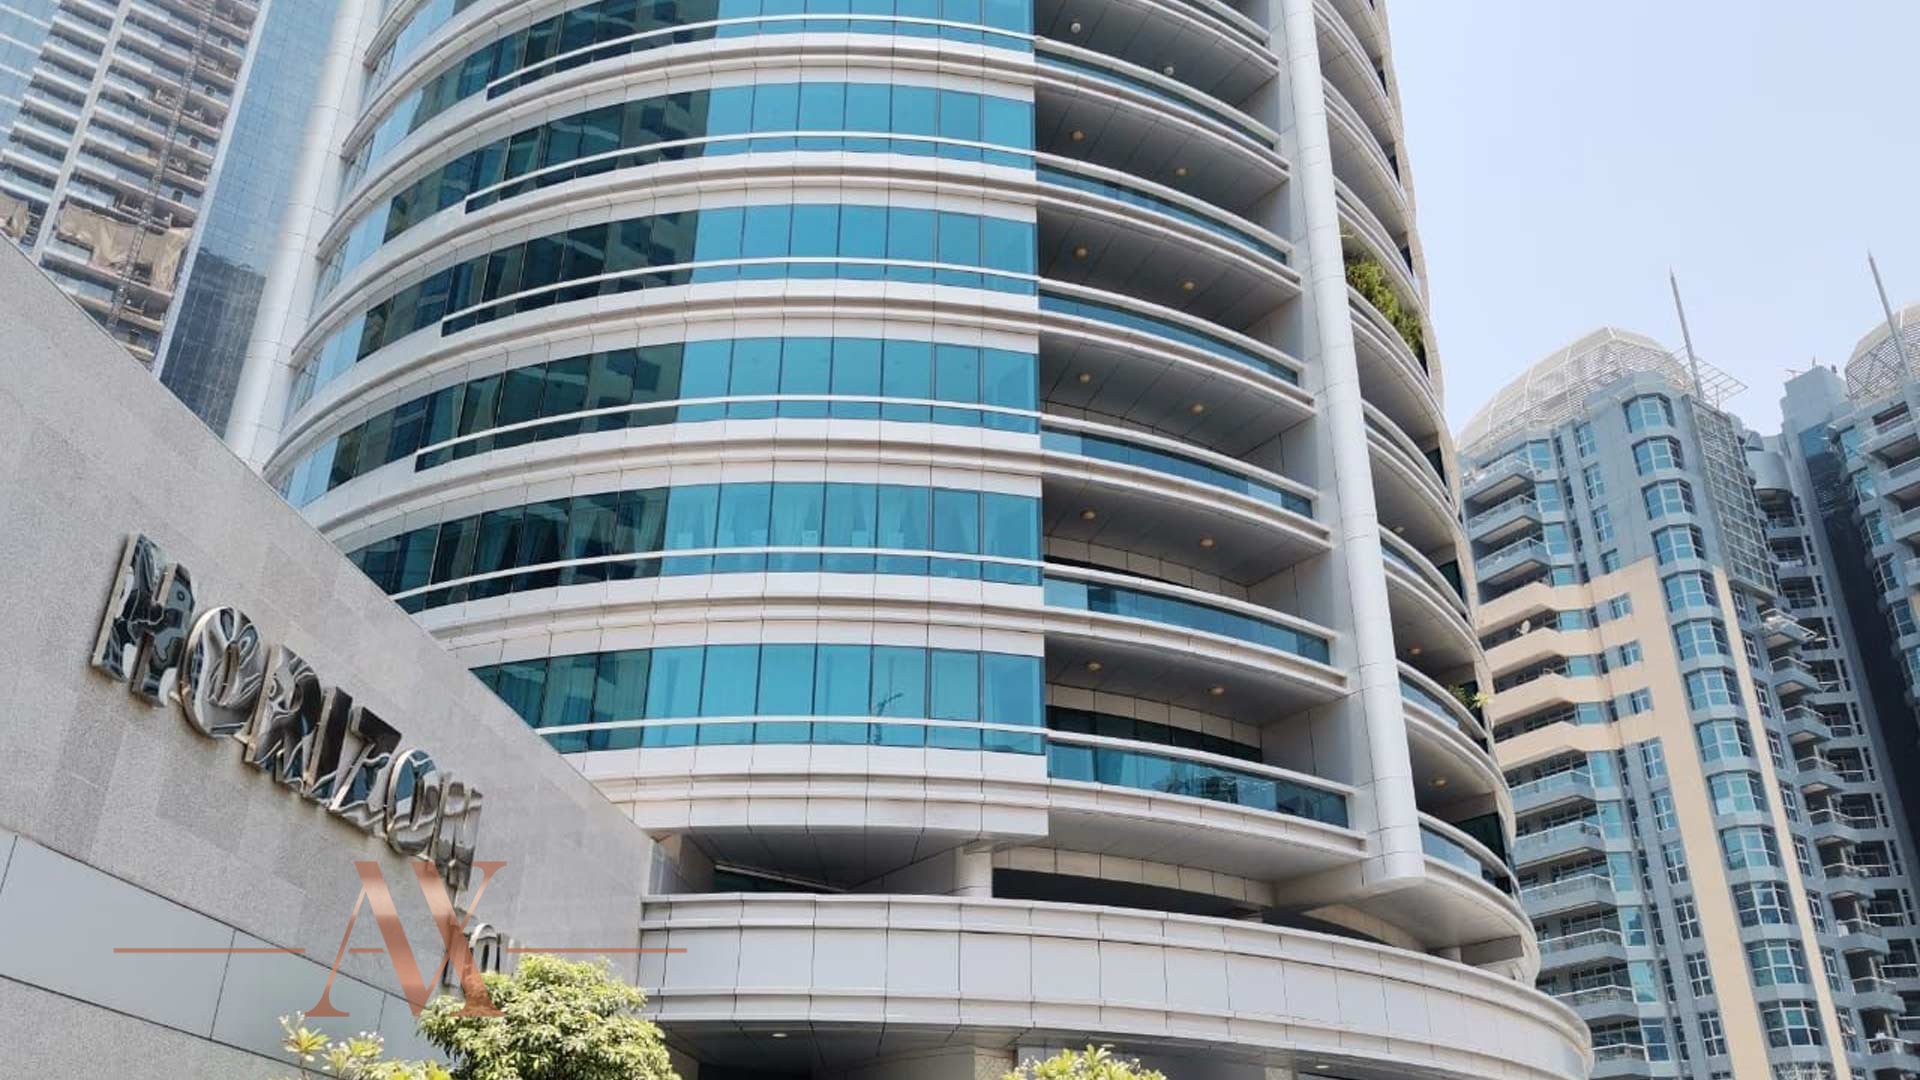 HORIZON TOWER property for sale with Bitcoin & Cryptocurrency - 1